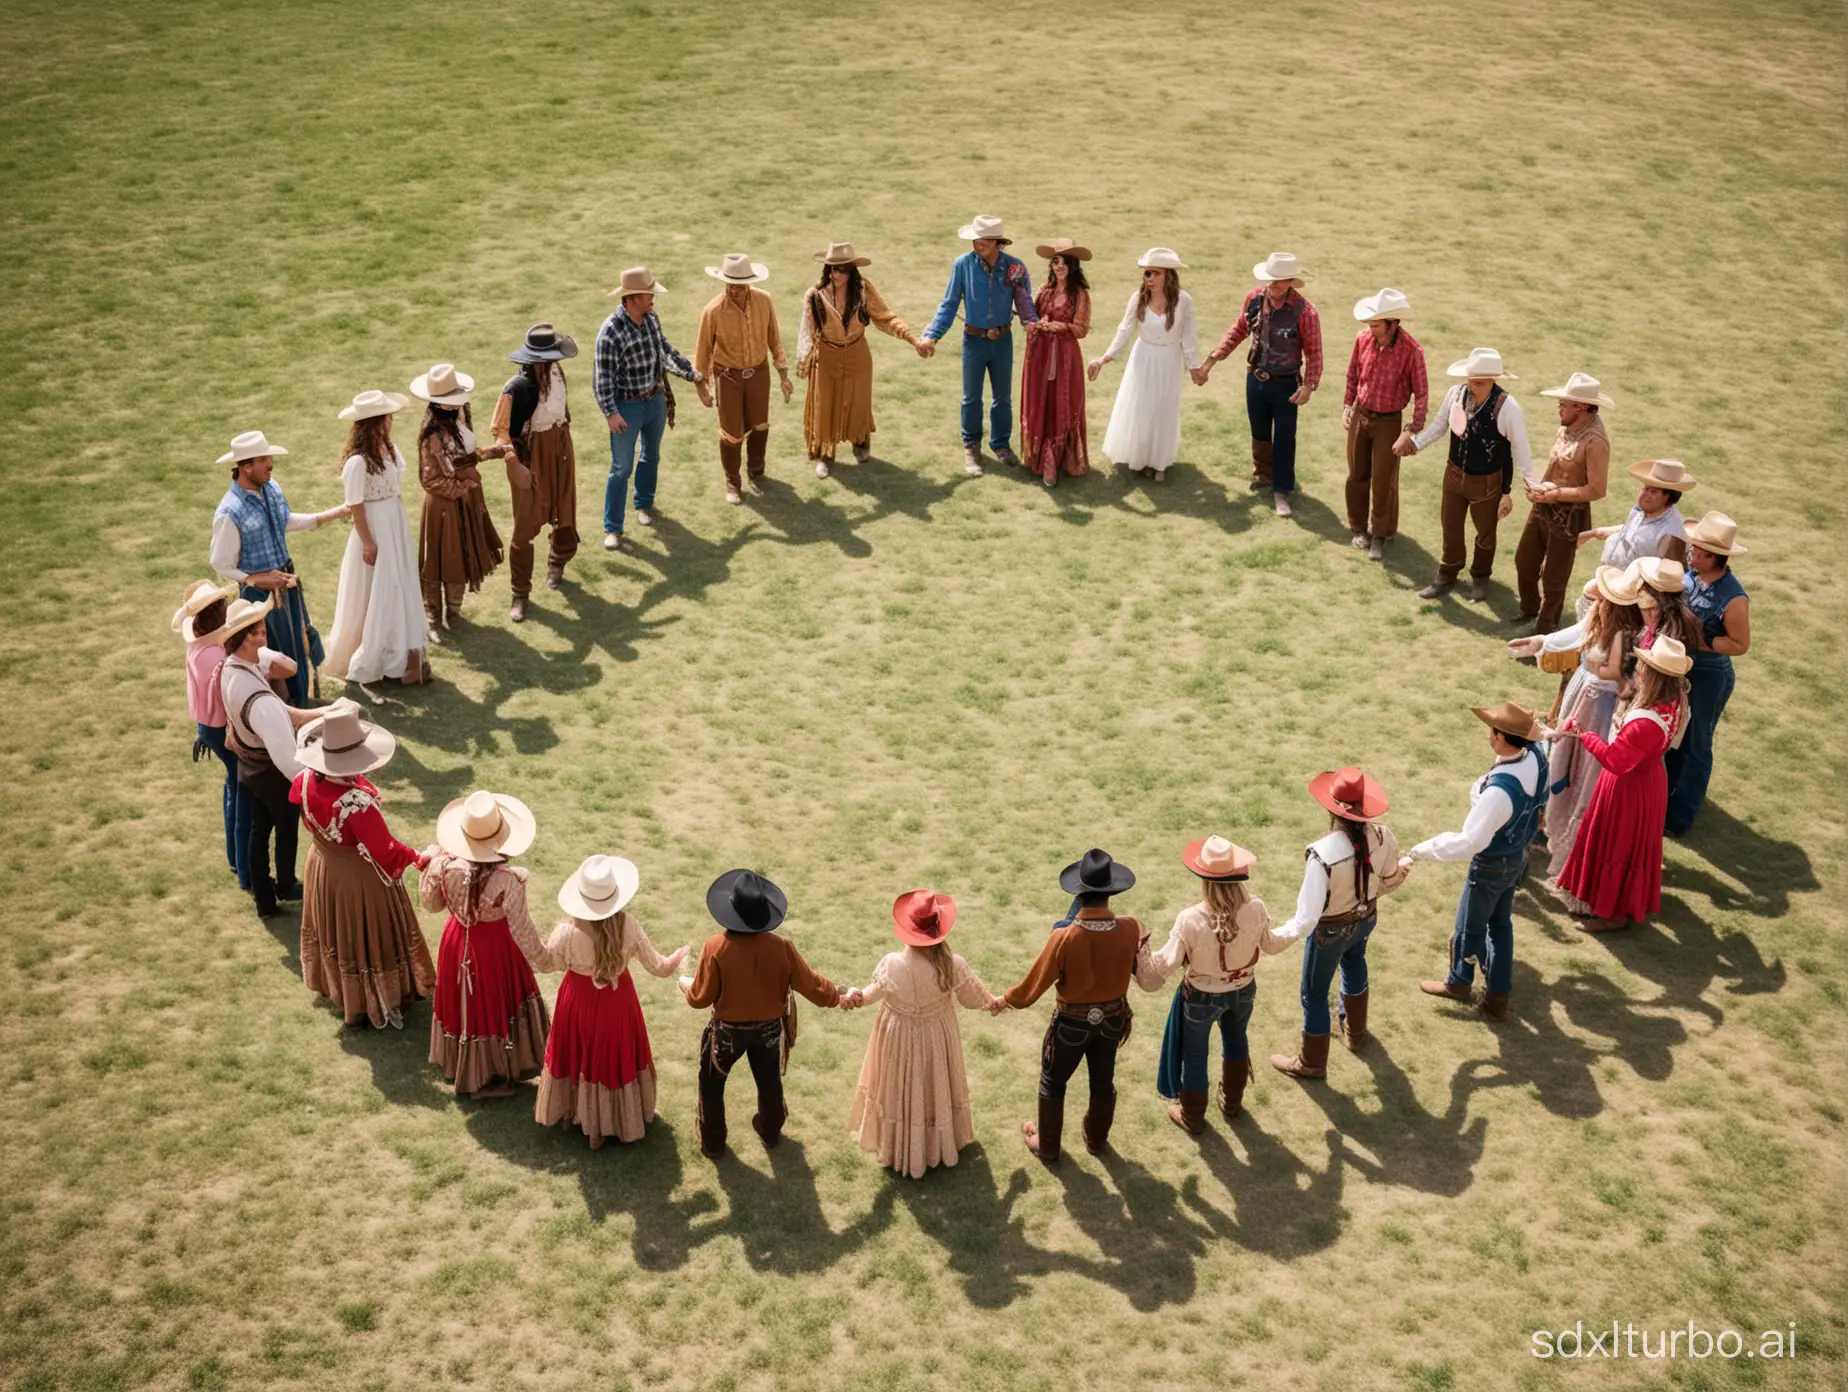 In a large outdoor yard several pairs, hand in hand, in cowboy party costumes, form a large circle, with alternating couples, man holds woman's hand